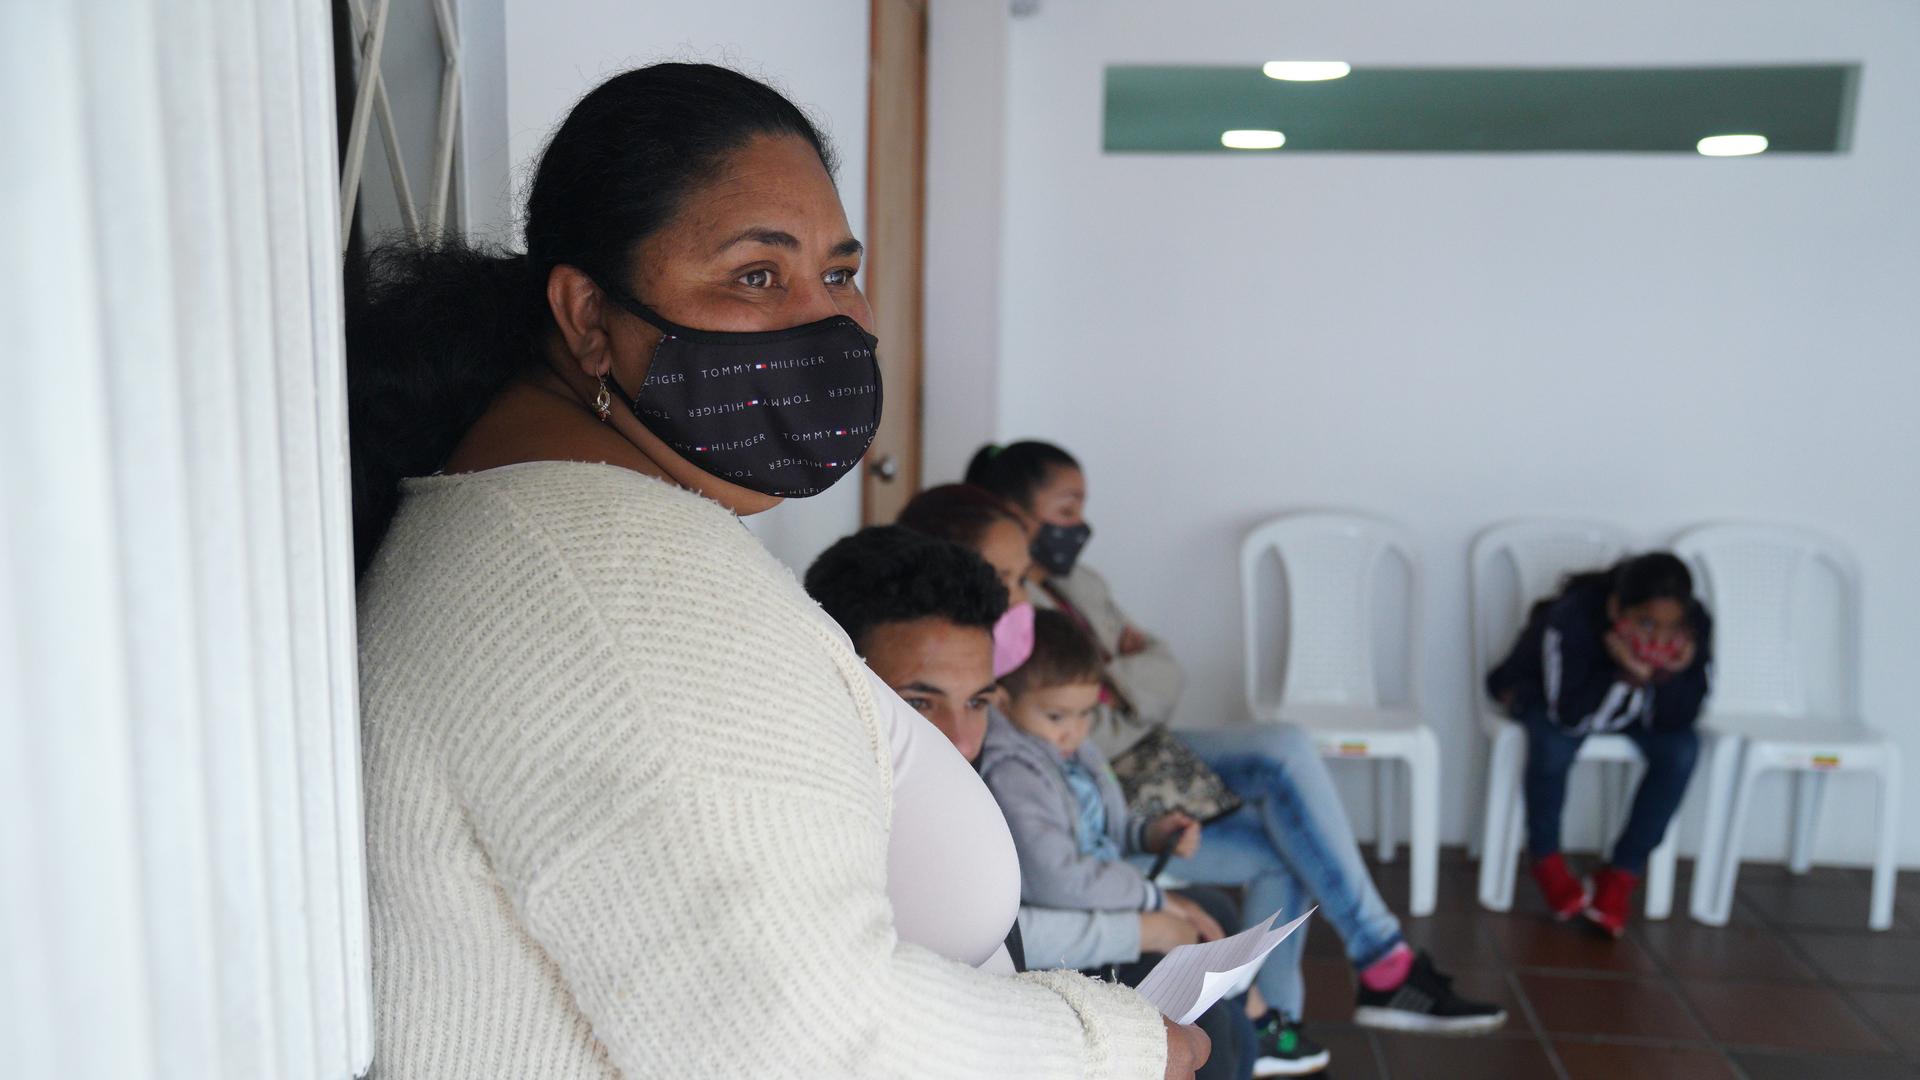 Iselle Toledo waits for a medical appointment at Juntos Se Puede an organization that helps Venezuelan migrants in Bogotá, Colombia.